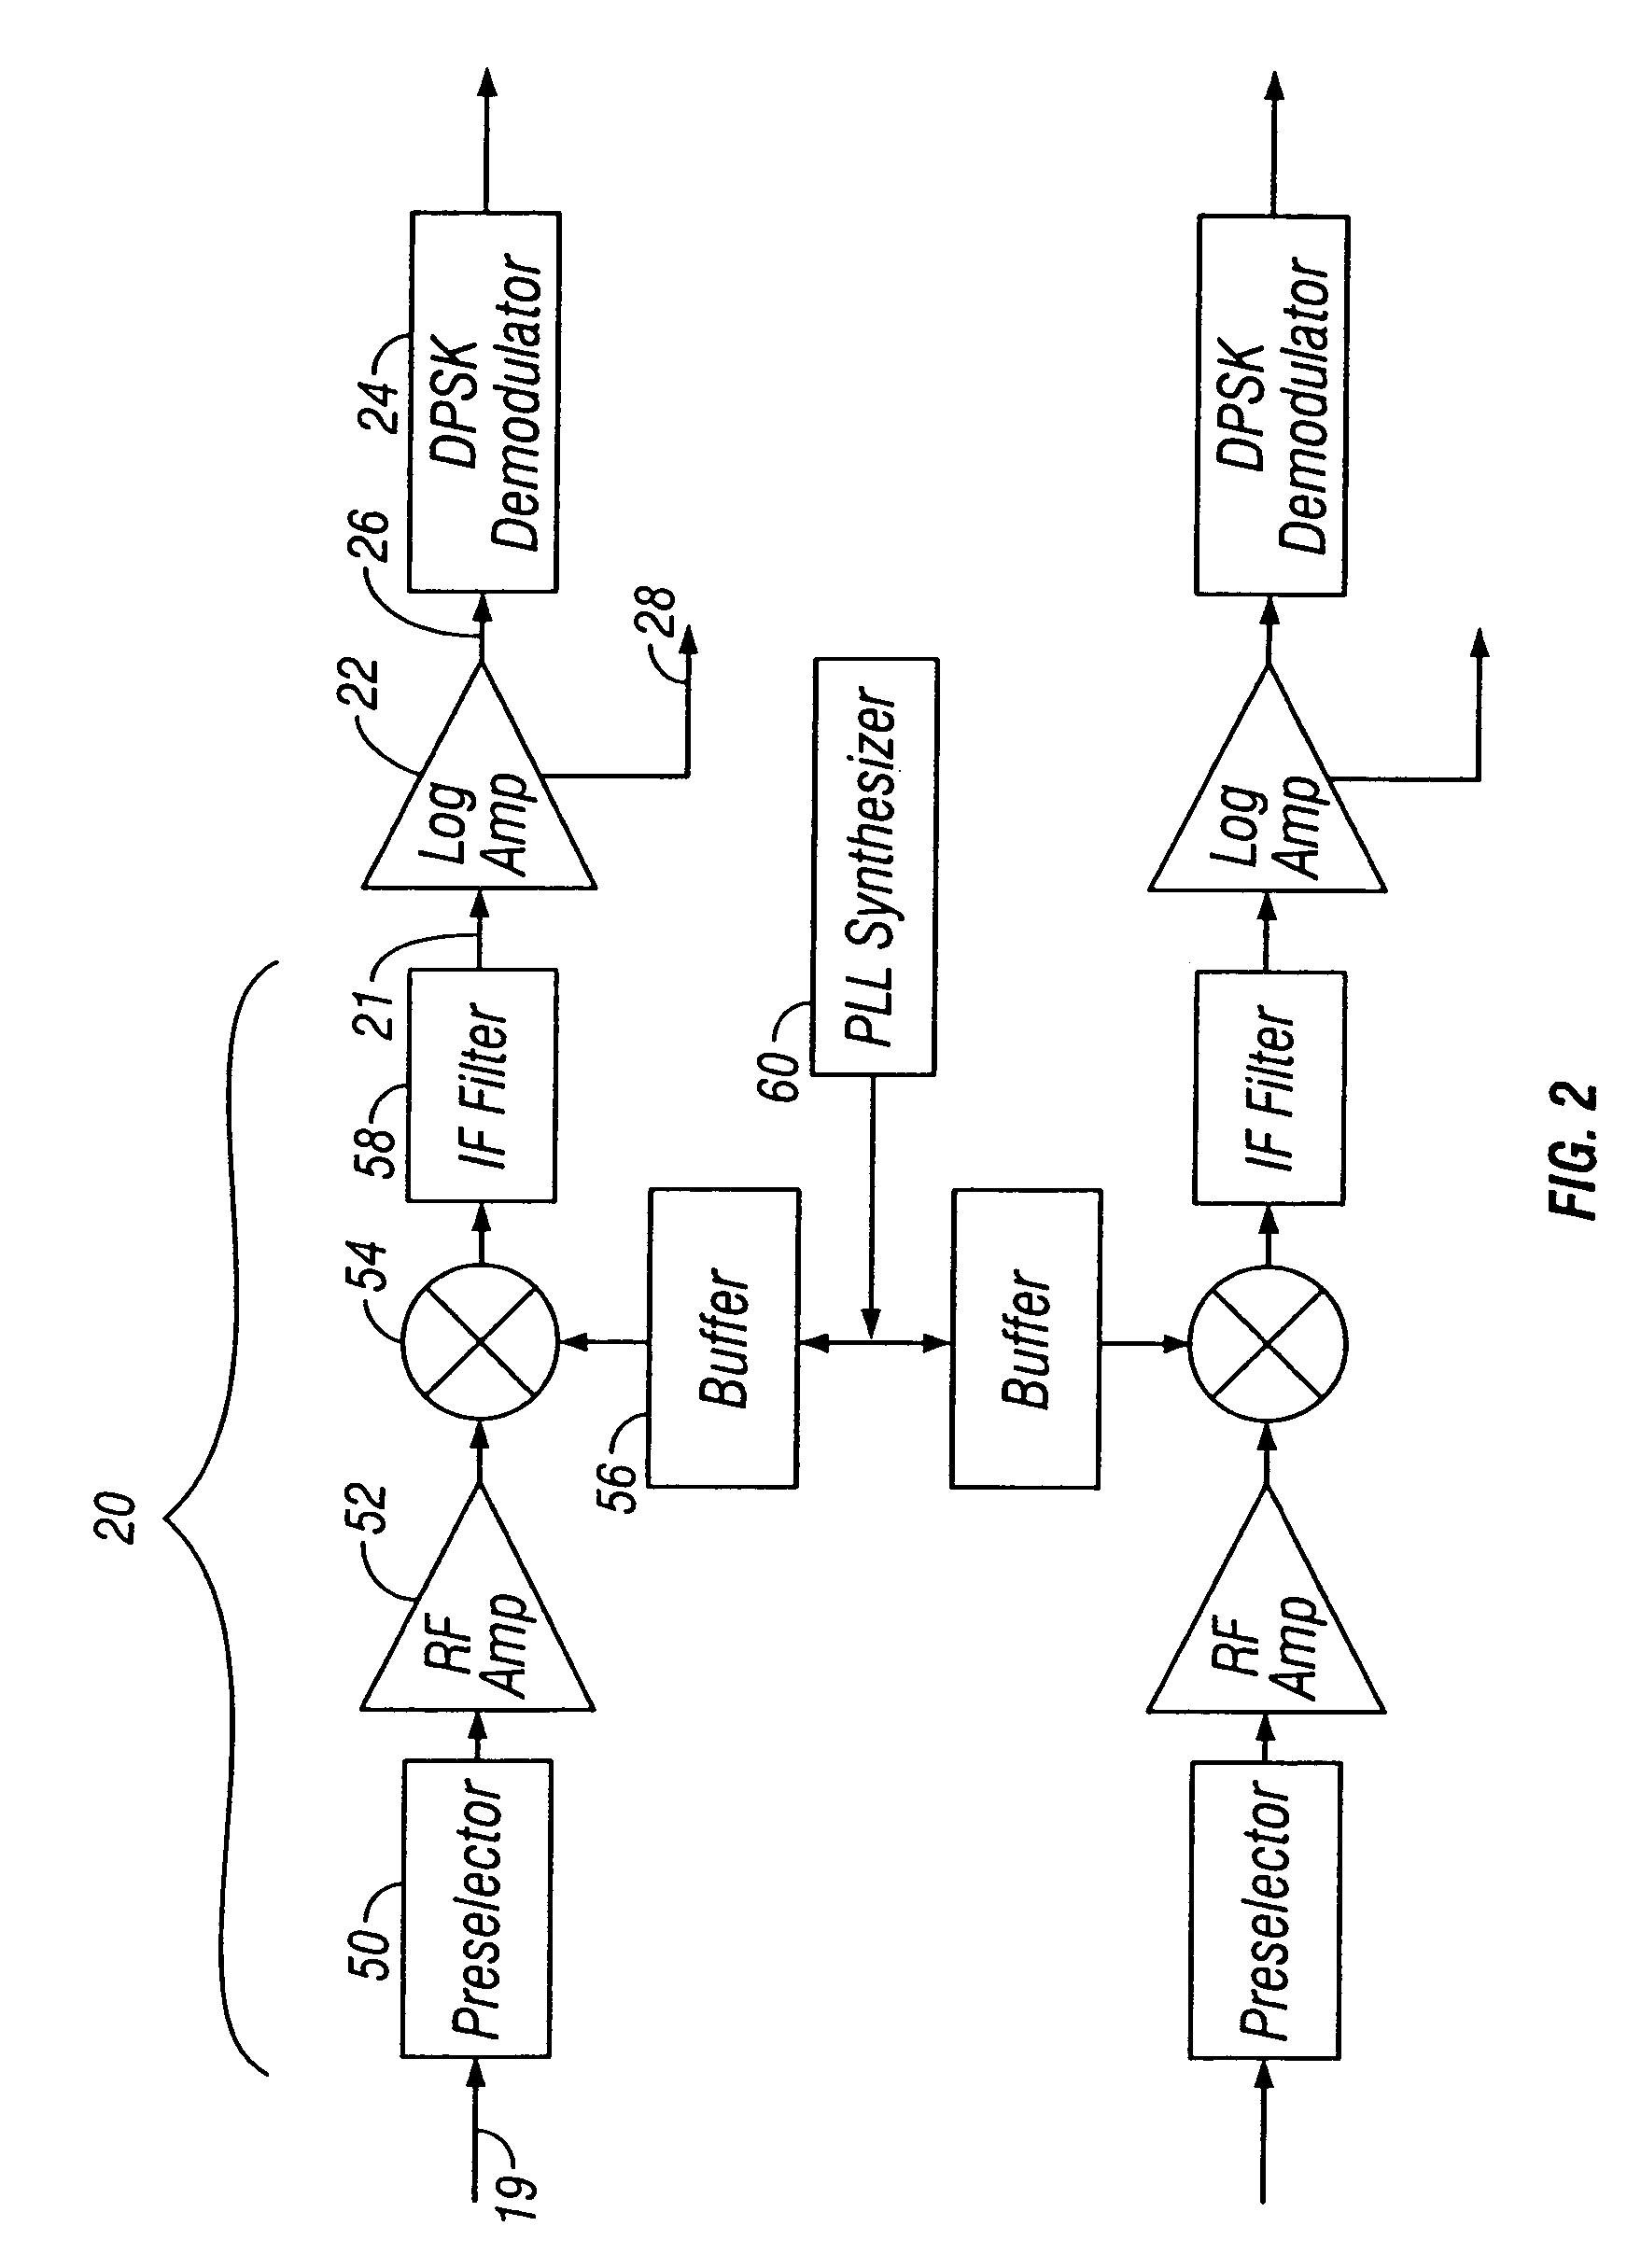 Device and method for SPR detection in a Mode-S transponder